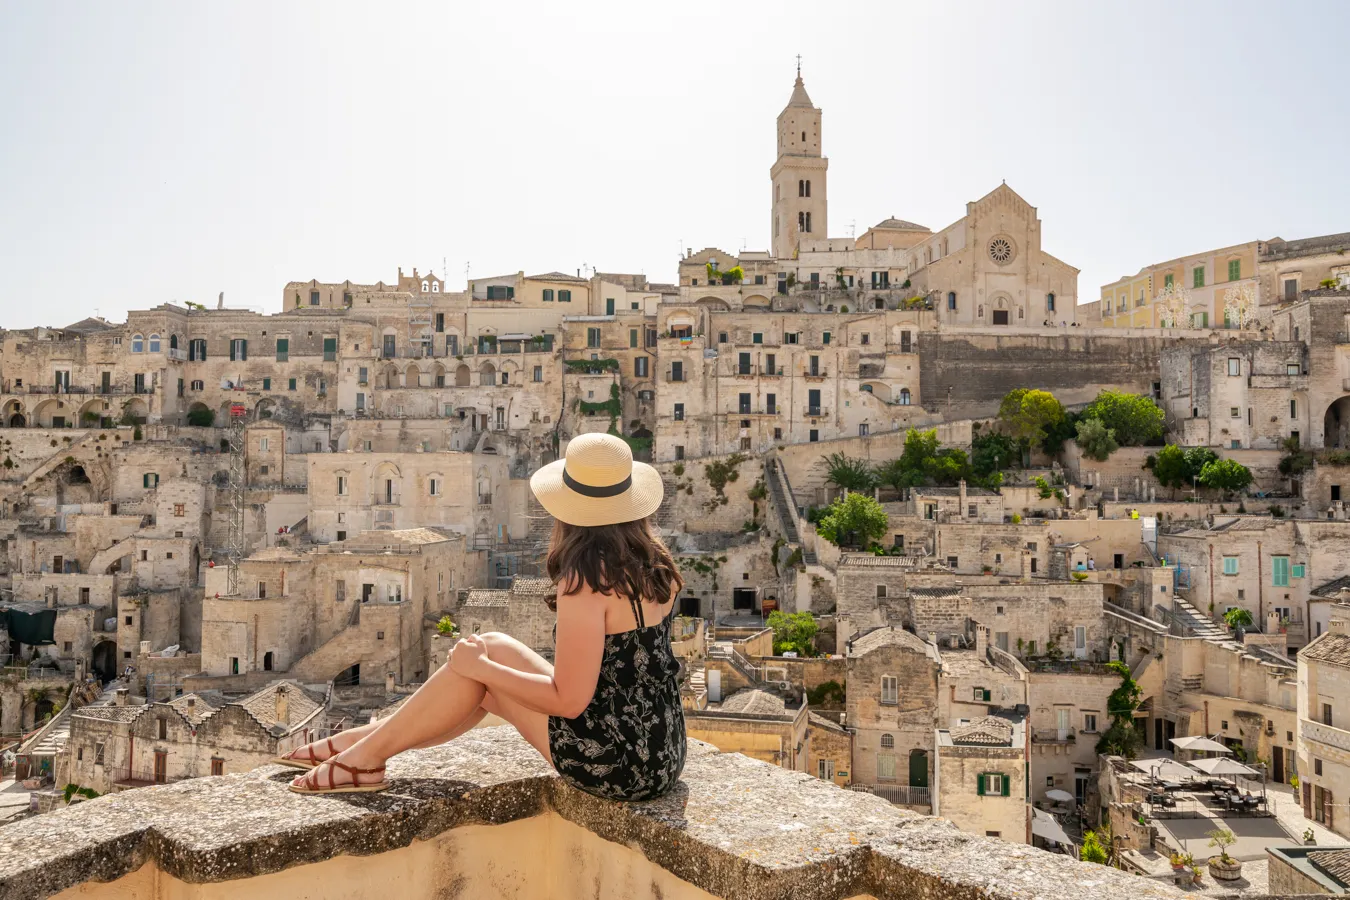 kate storm sitting on a ledge overlooking matera, one of the top destinations in southern italy vs northern italy